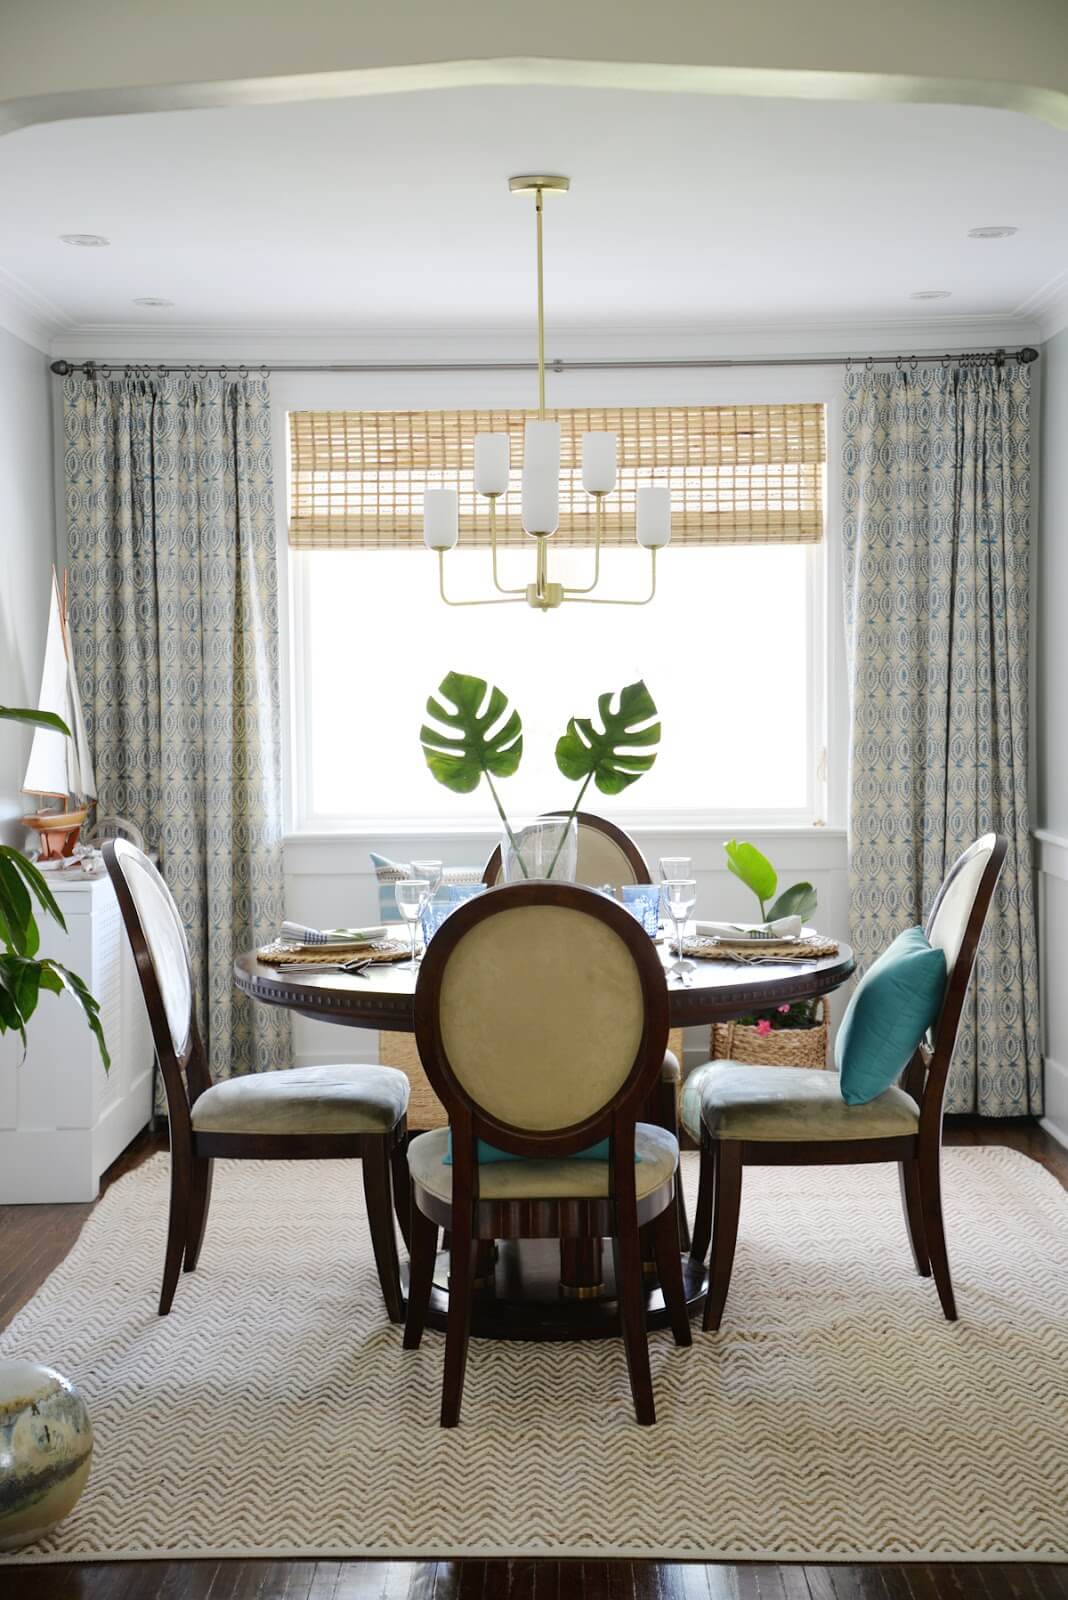 Generate Your House With Some Tropical Dining Room Ideas